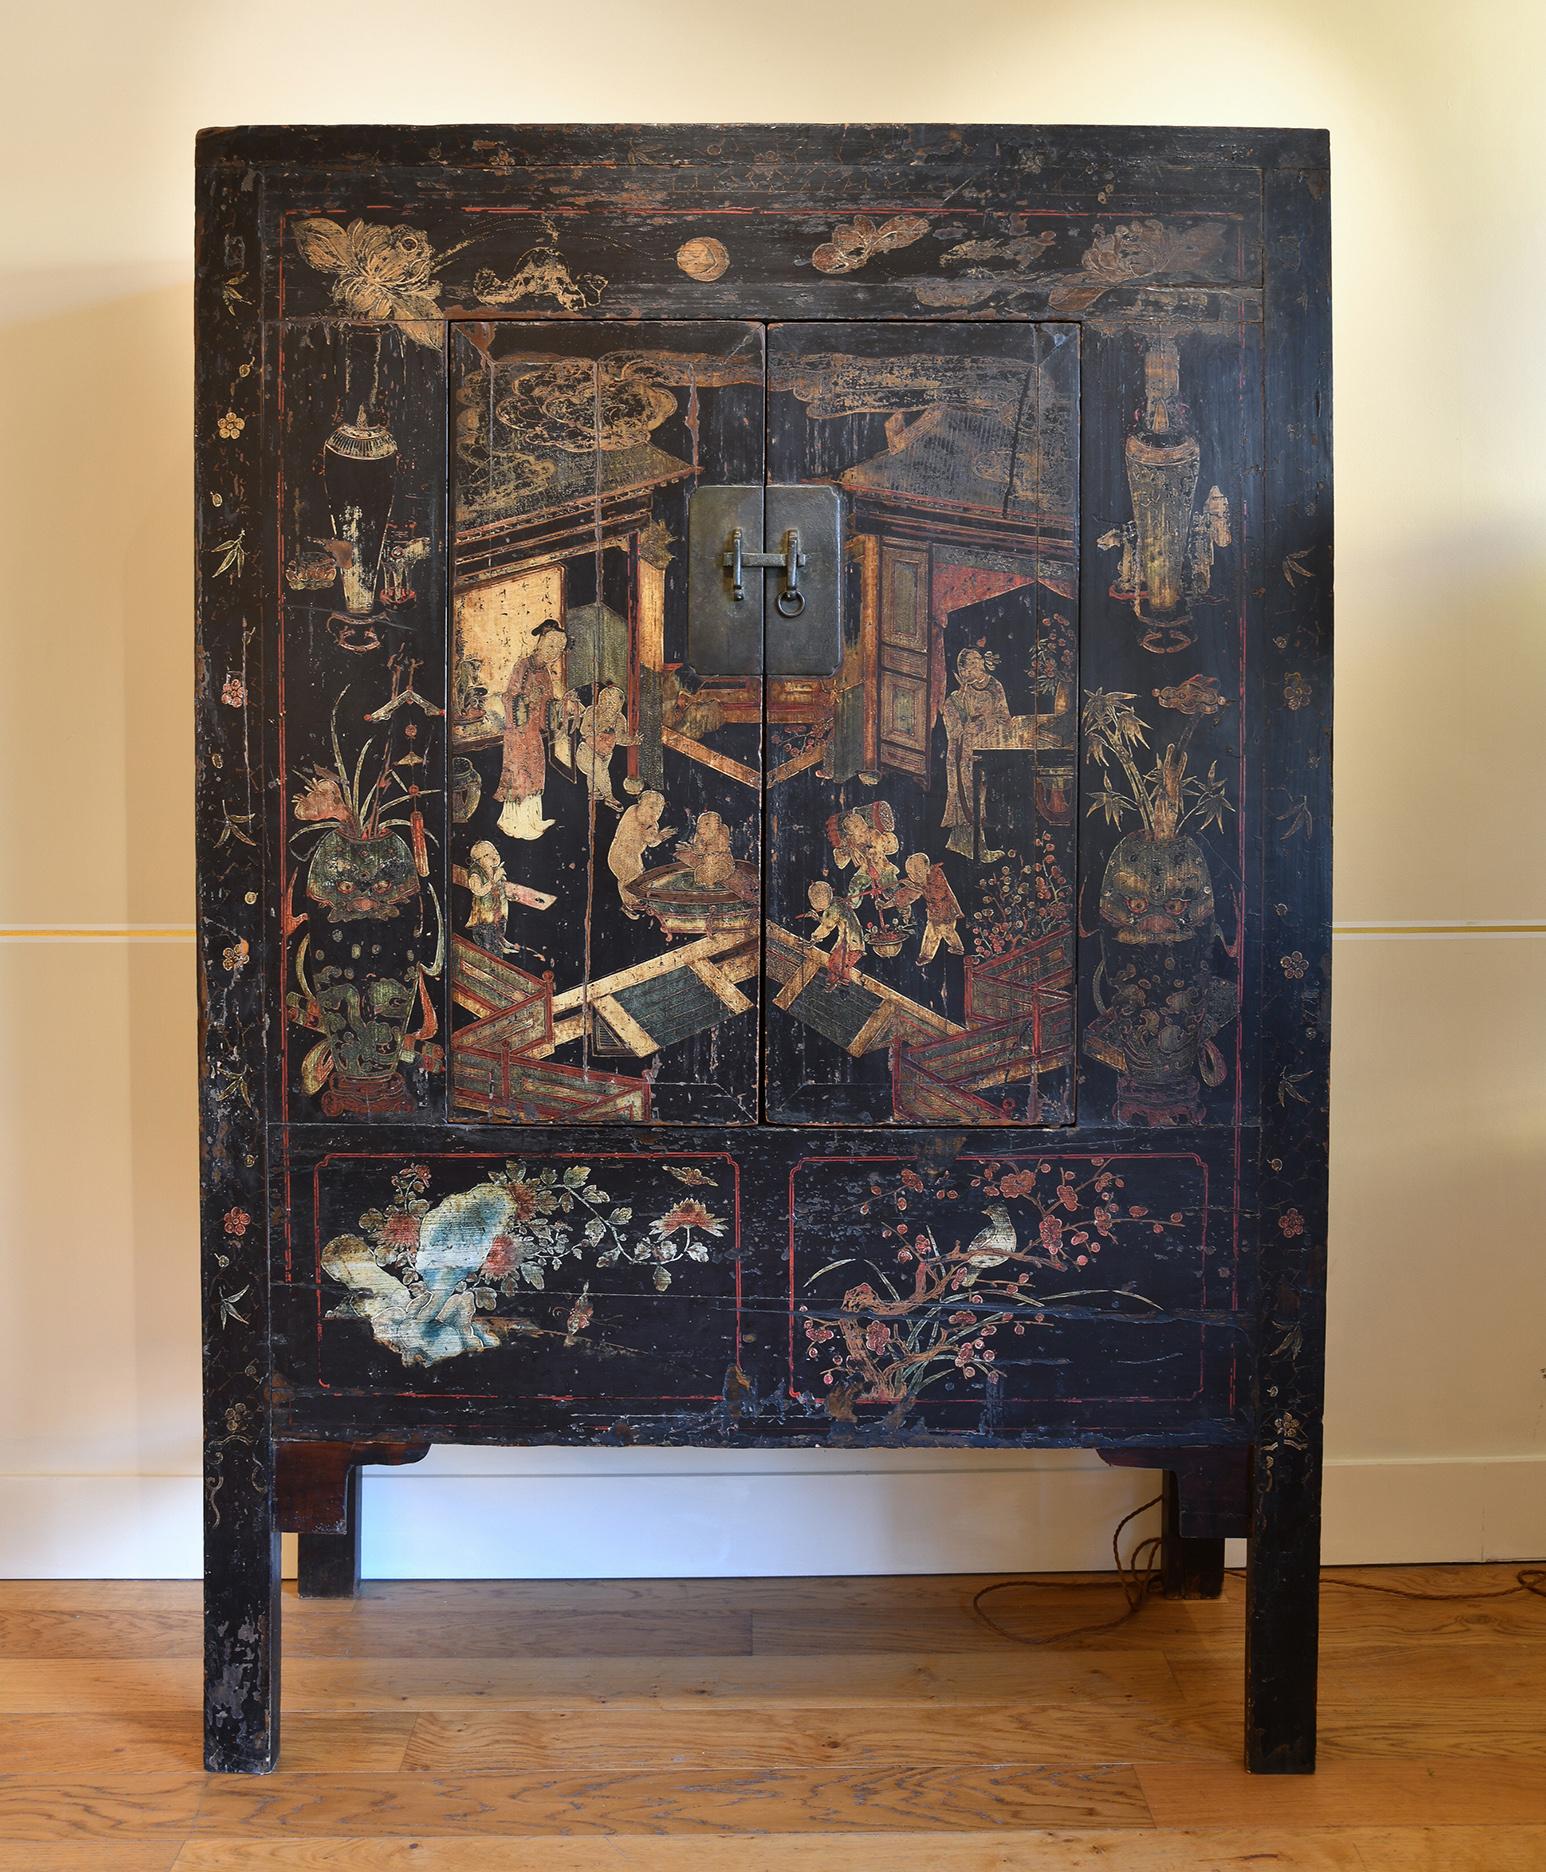 A large black lacquer cabinet, with gold and polychrome motifs depicting birds, flowers, foliage, vases, architecture and scenes of life
The door two doors adorned with a bronze lock, opening to reveal a central shelf, and a secret compartment at